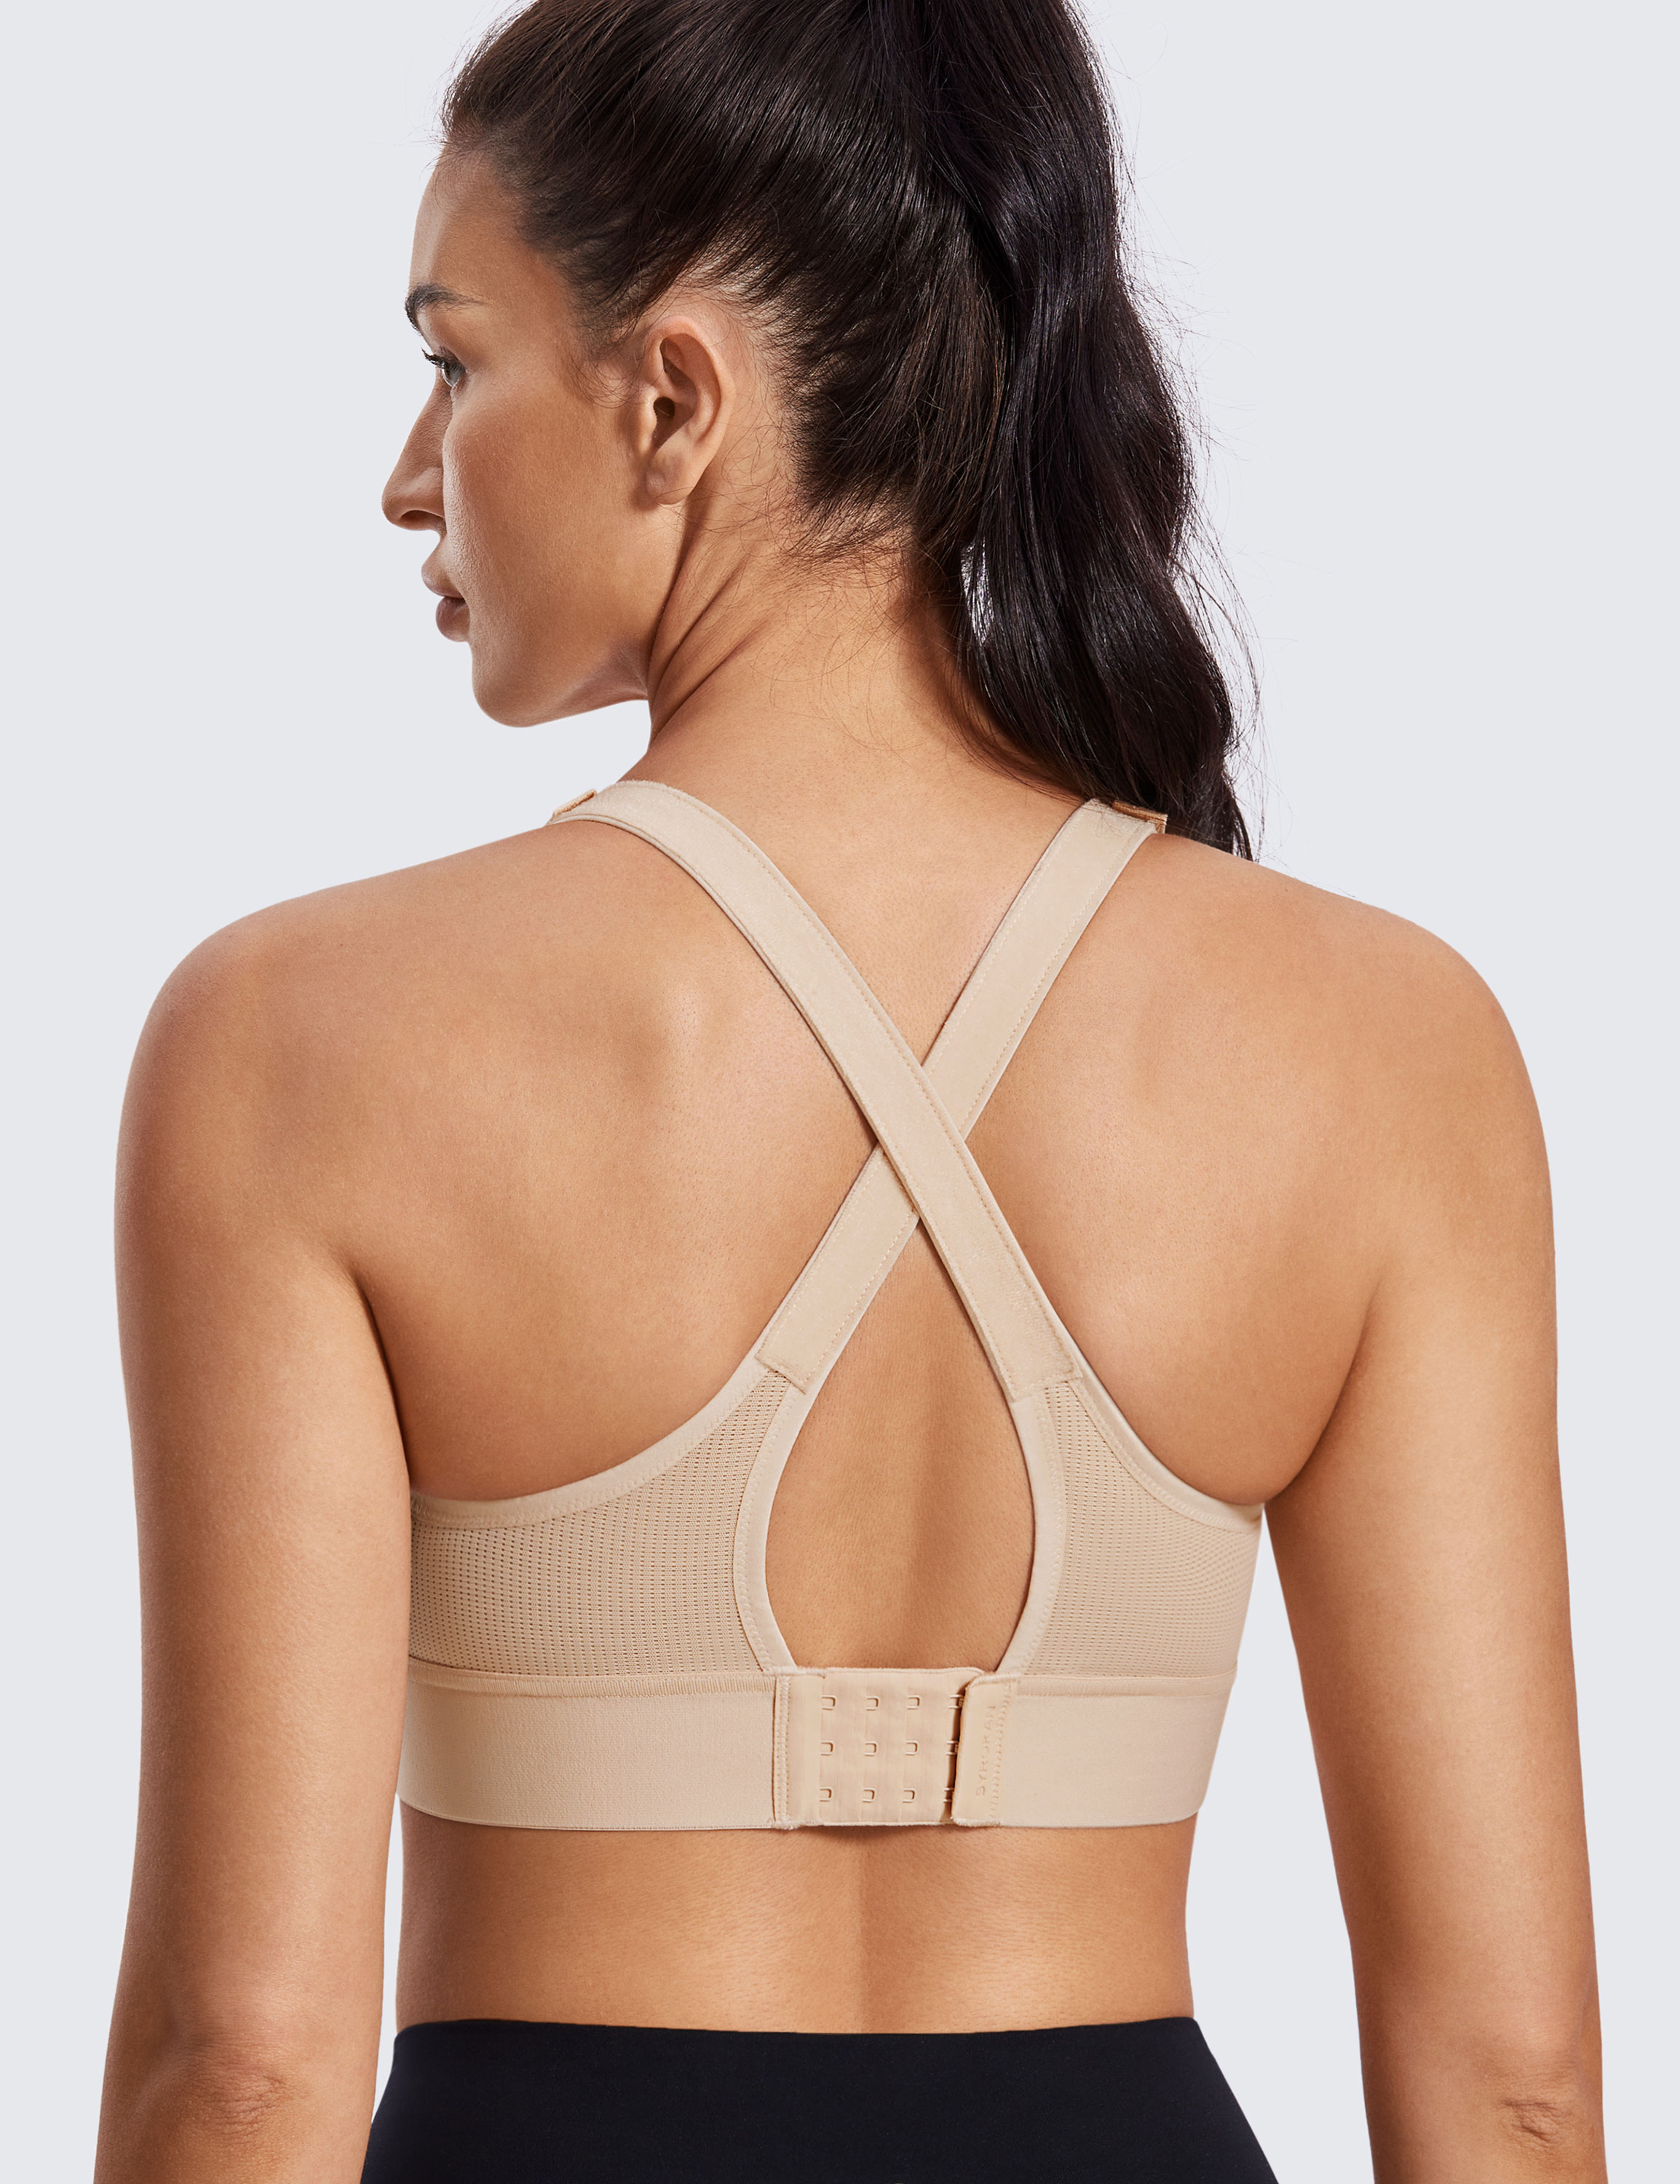 4 Supportive Sports Bra Tops for Big Busts